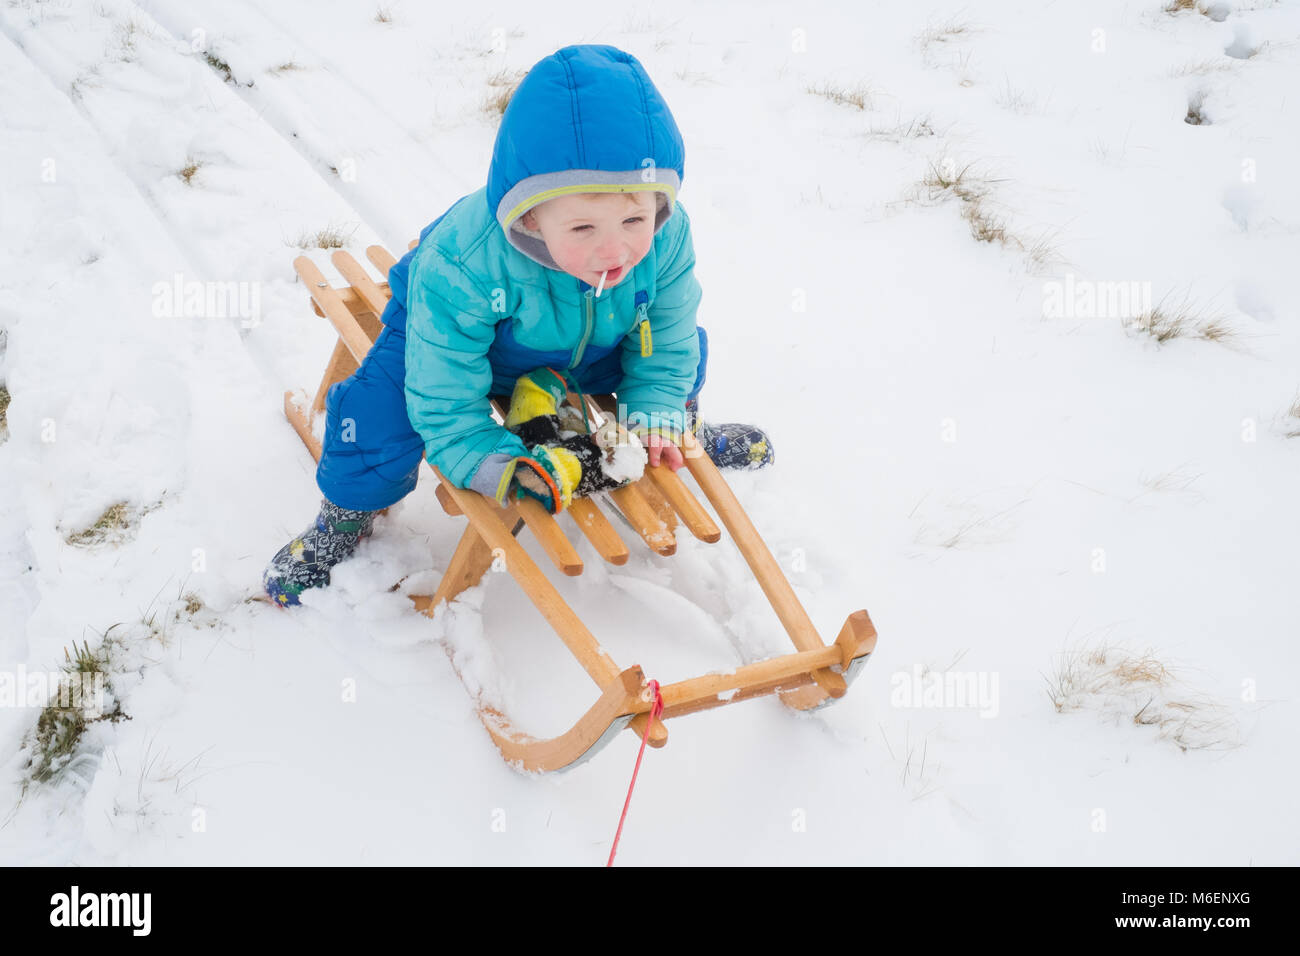 Eighteen month old baby boy in the snow, Medstead, Alton, Hampshire, England, United Kingdom. Stock Photo